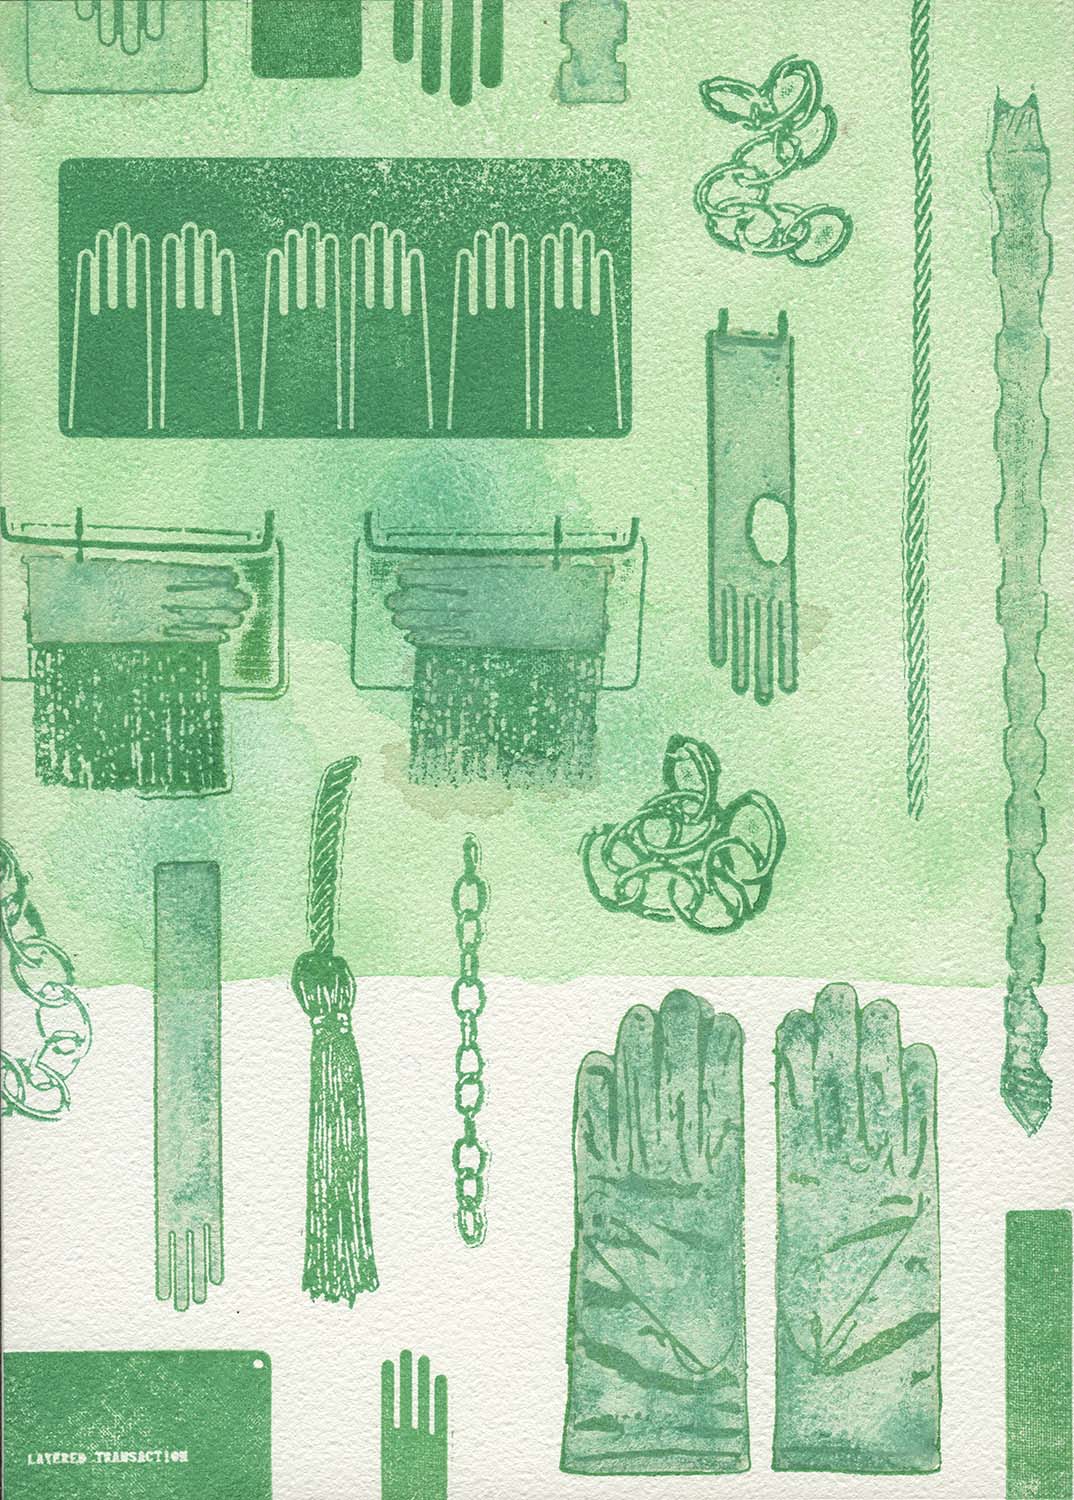 stamped images of gloves chains and tassels